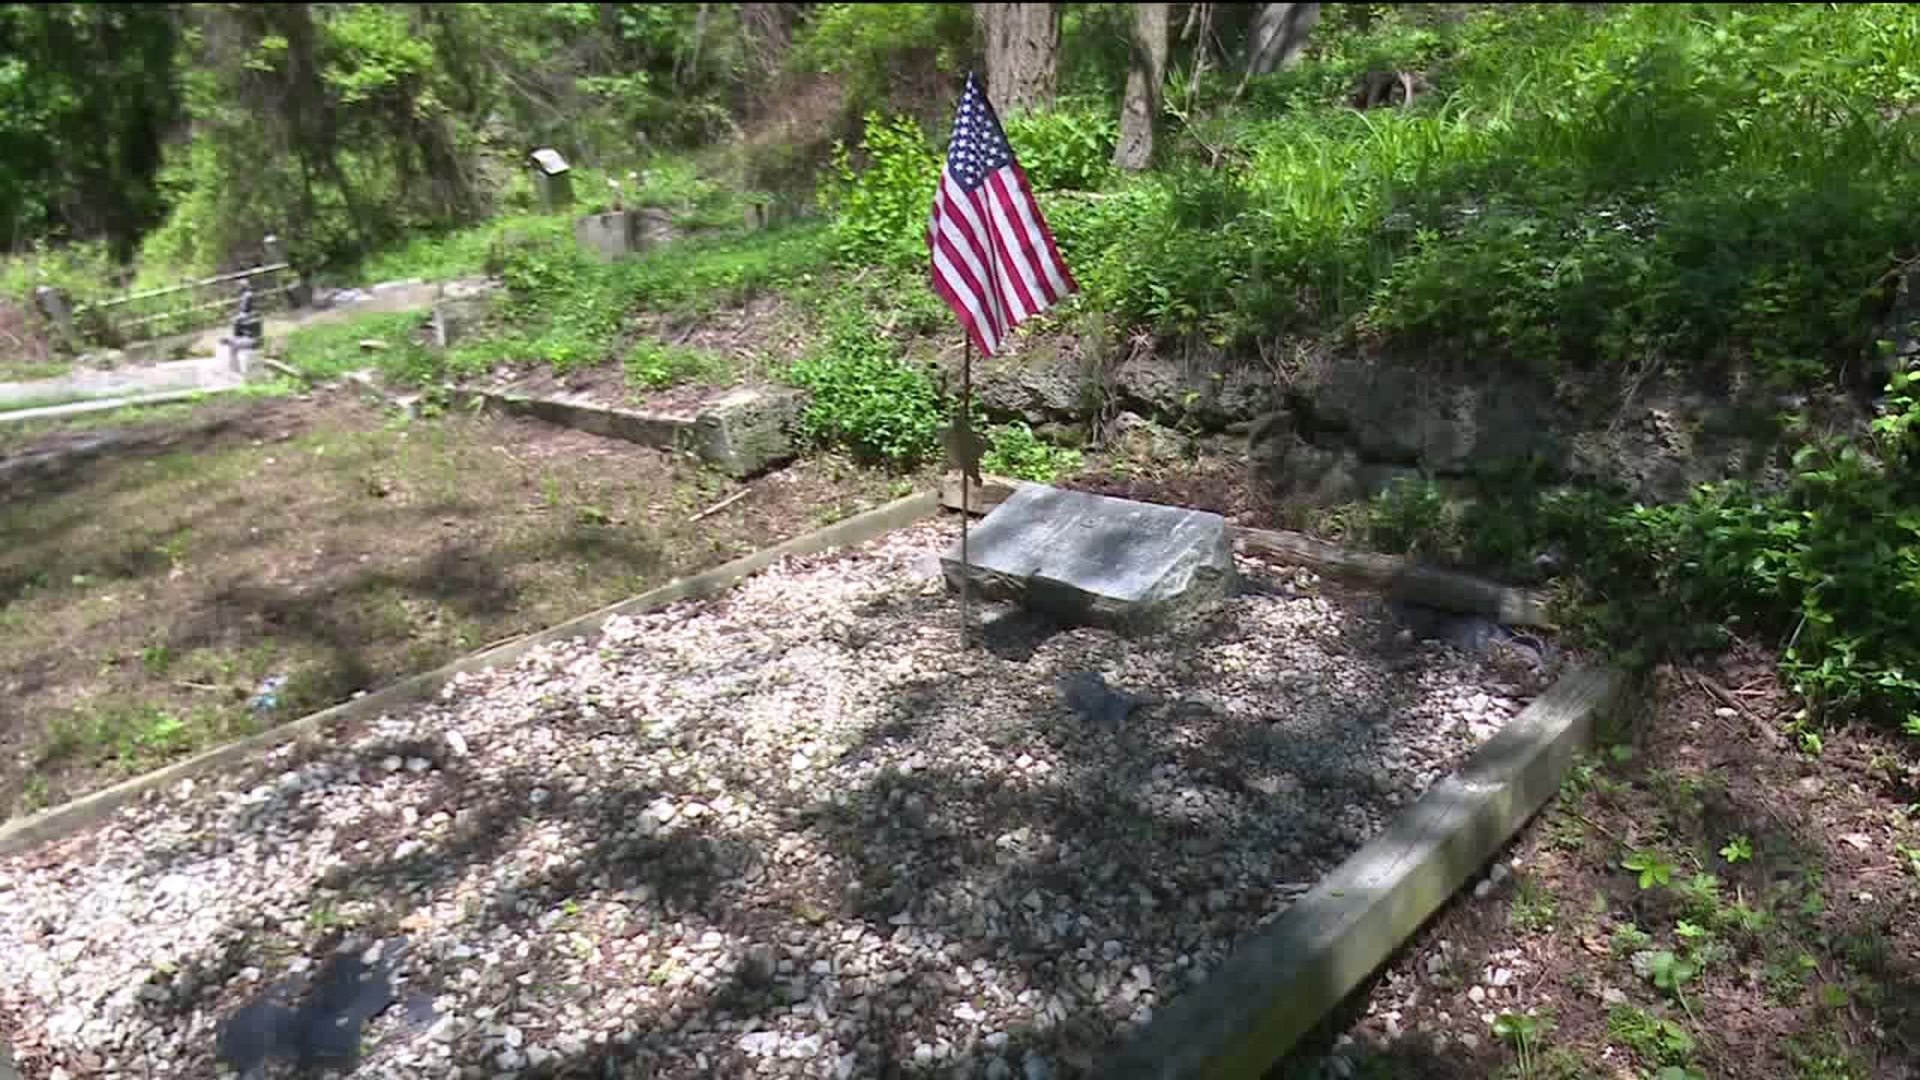 Taking Care of Historic Cemetery